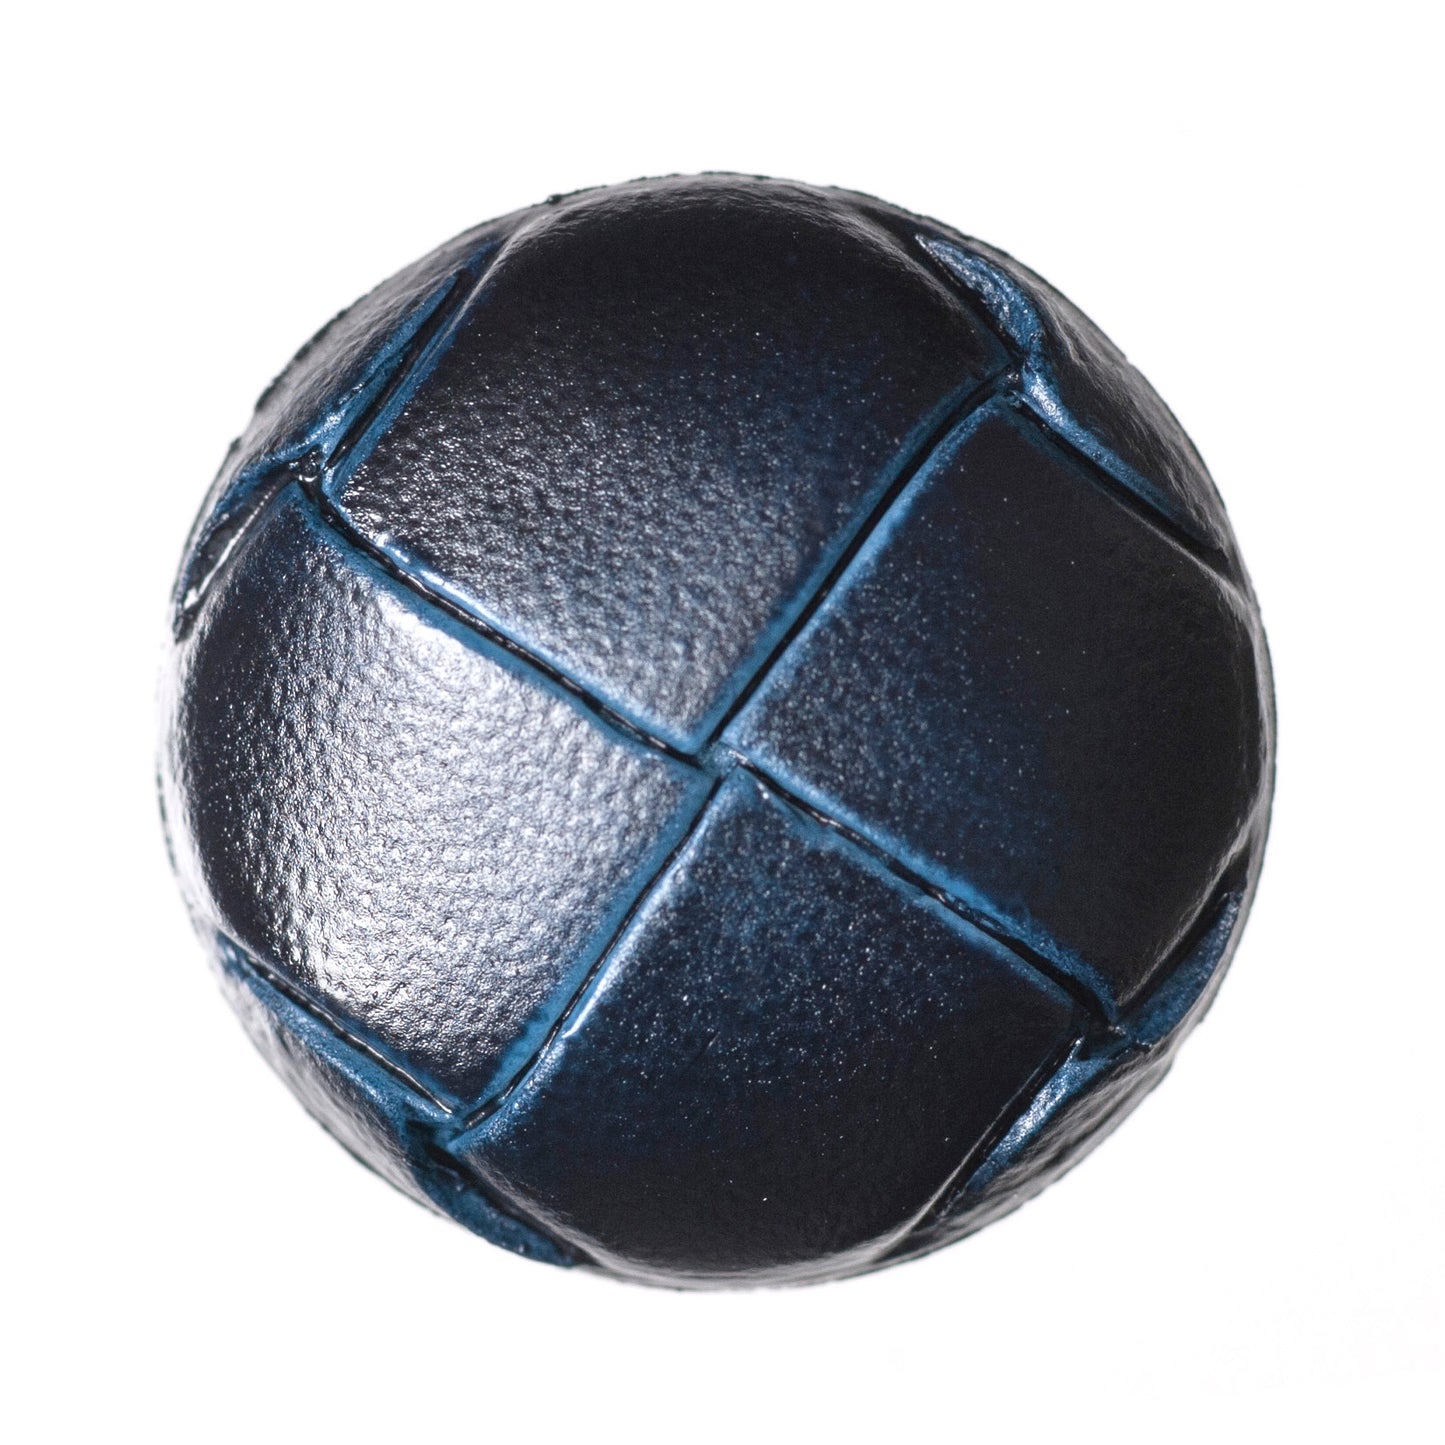 Imitation Leather Shank Button - 19mm - Navy